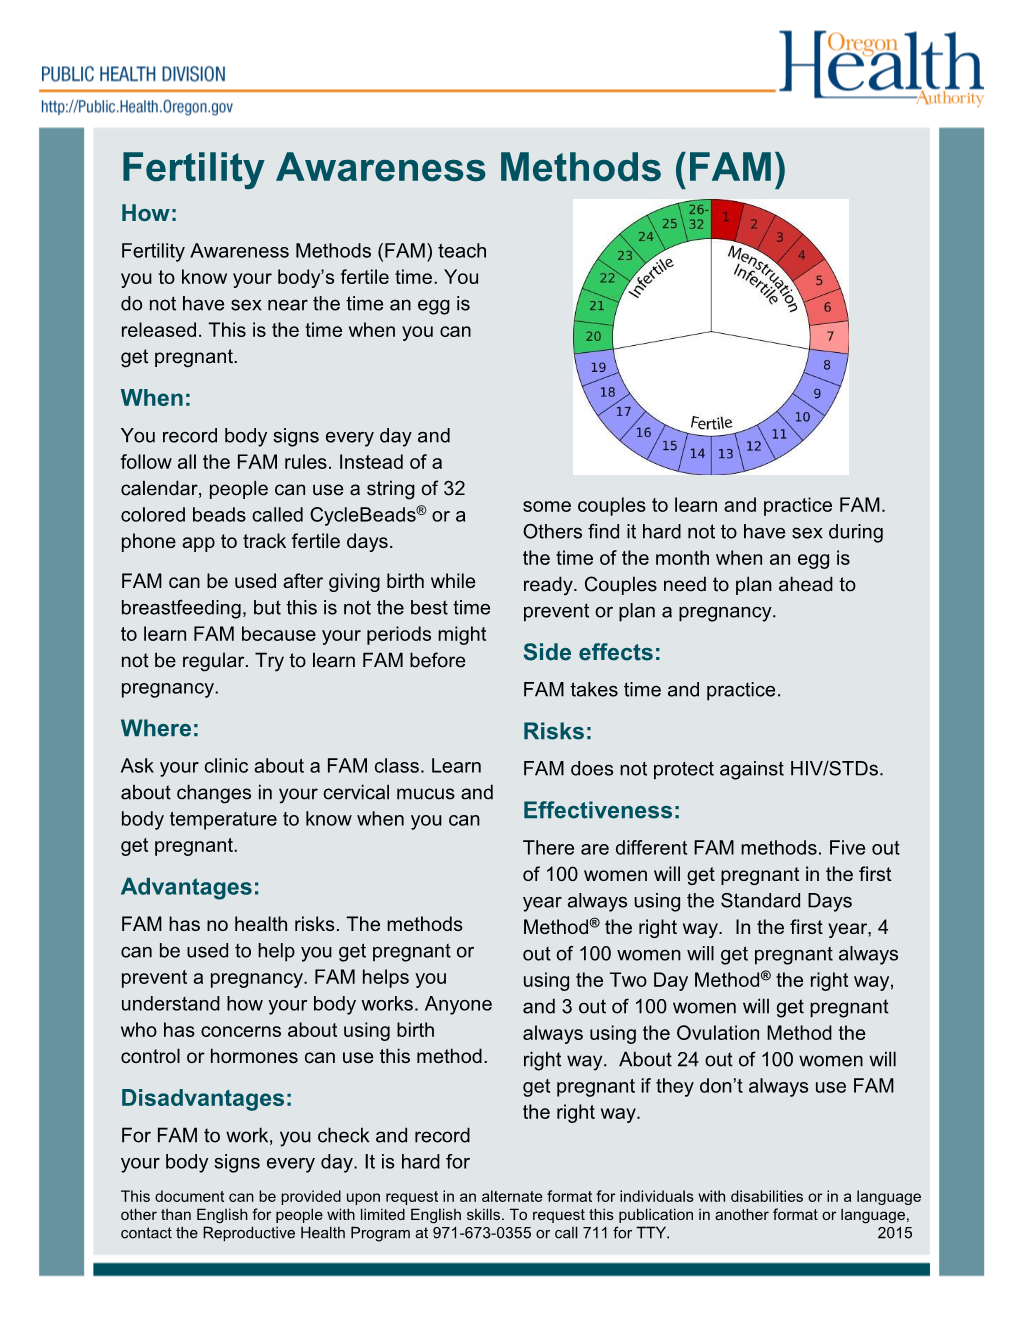 FAM) How: Fertility Awareness Methods (FAM) Teach You to Know Your Body’S Fertile Time